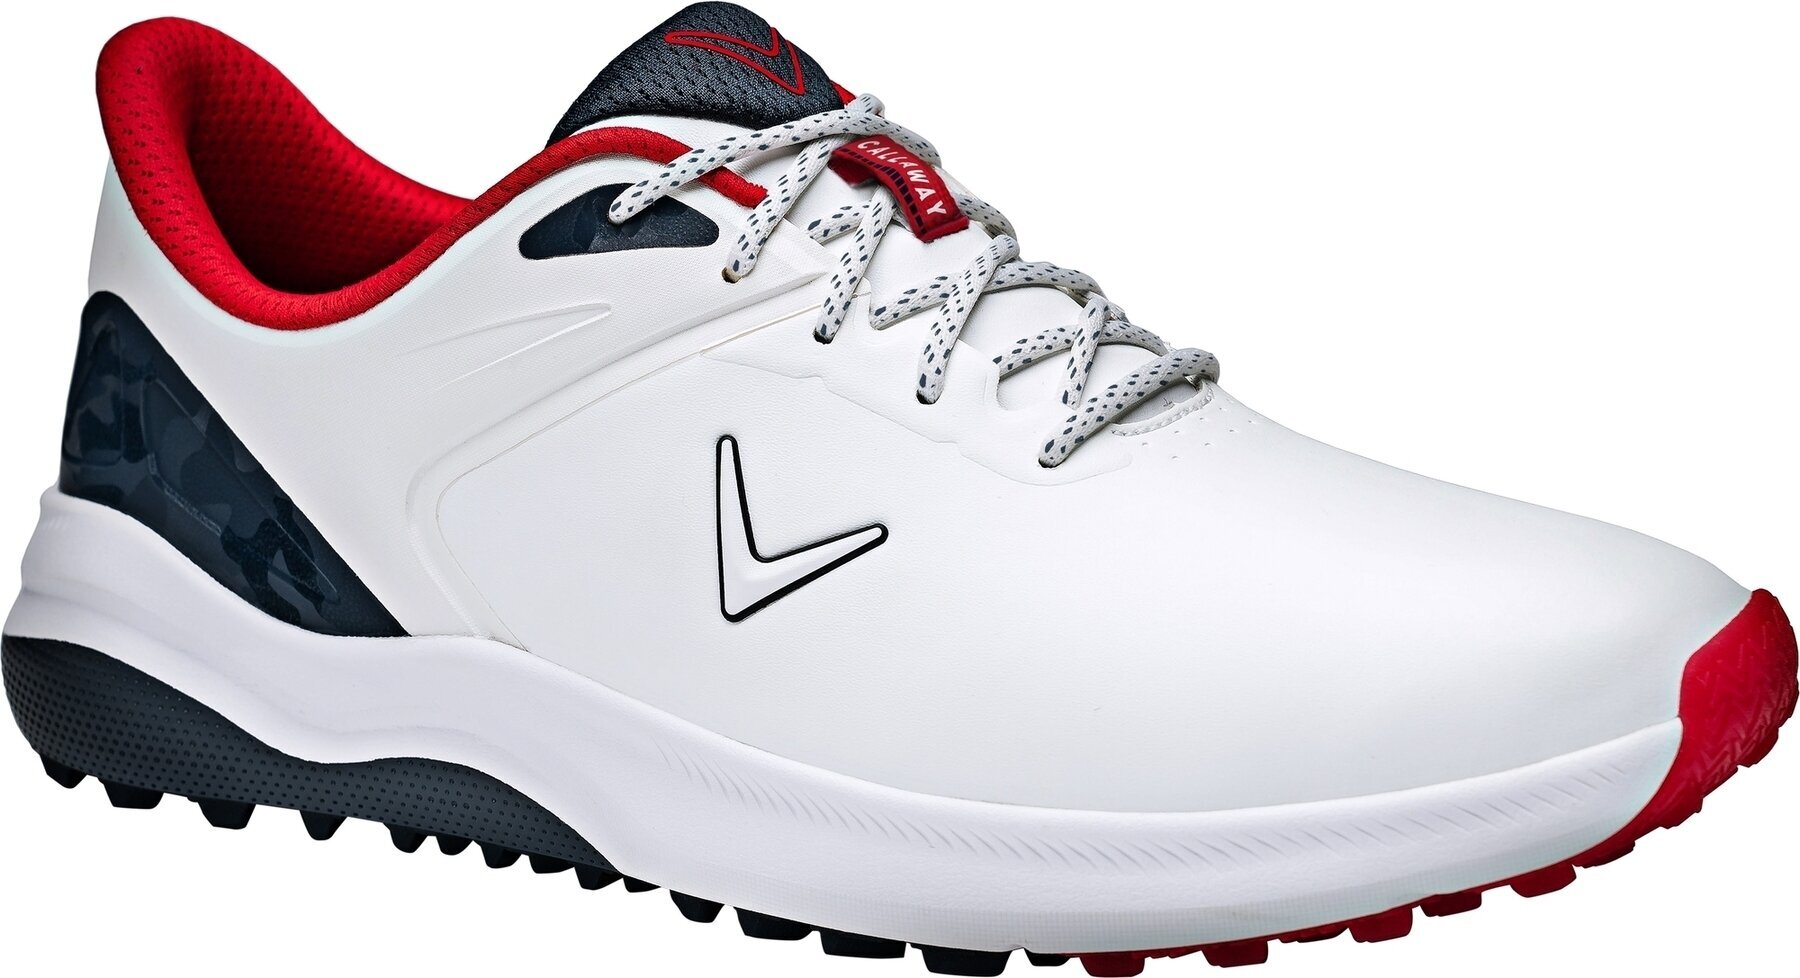 Men's golf shoes Callaway Lazer Mens Golf Shoes White/Navy/Red 43